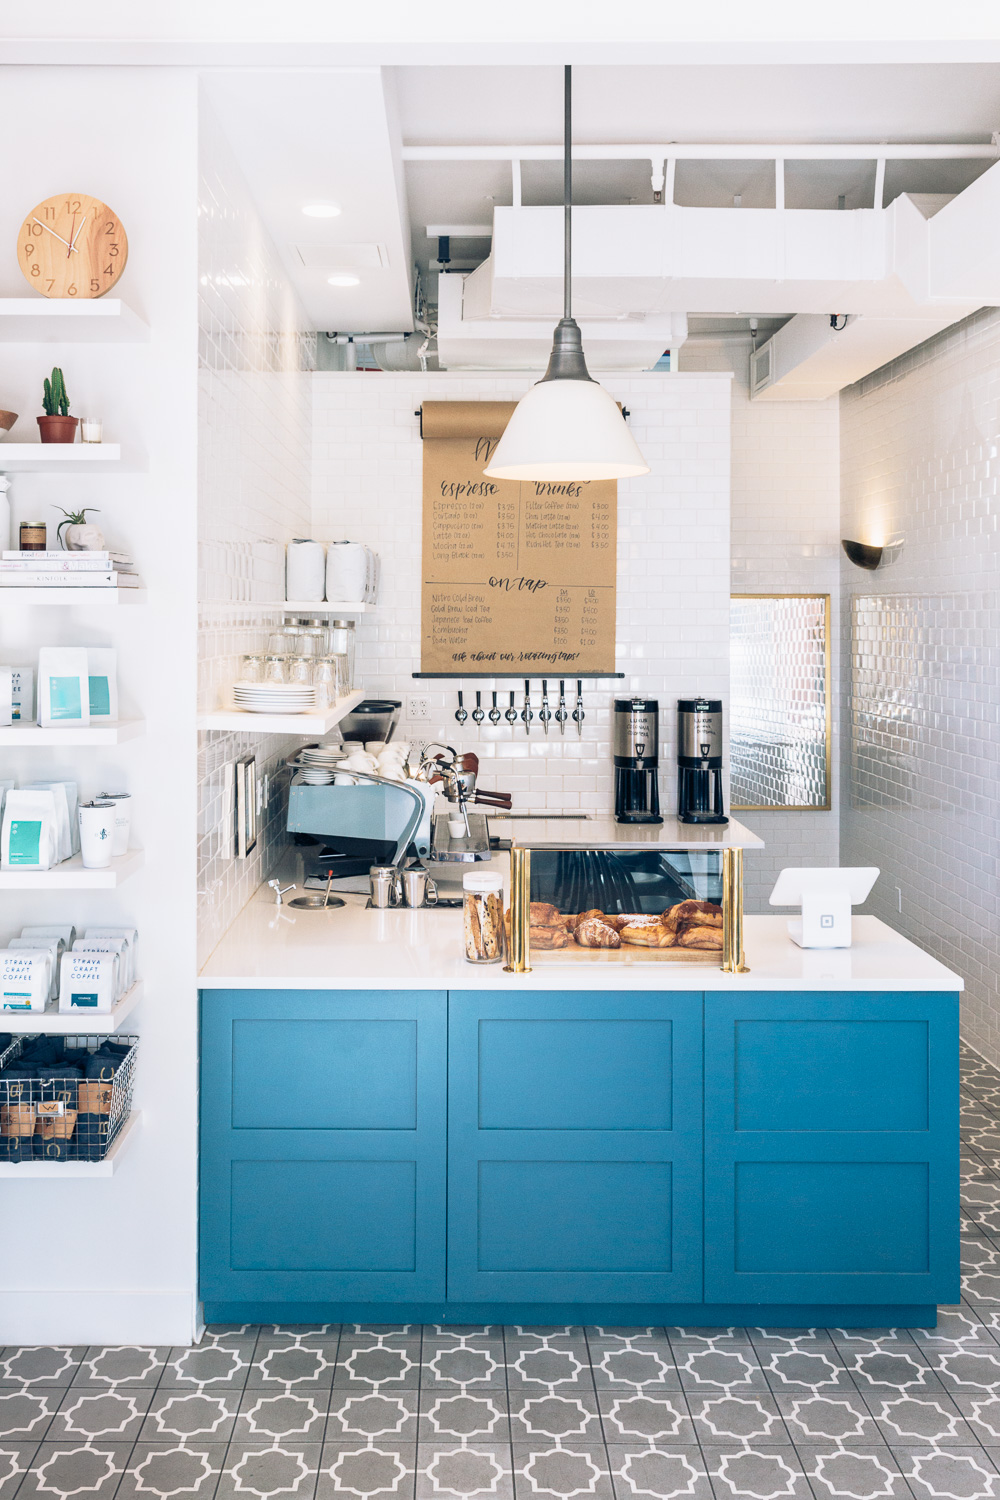 The Best DIY Ideas For A Kitchen Coffee Bar - The Fifth Sparrow No